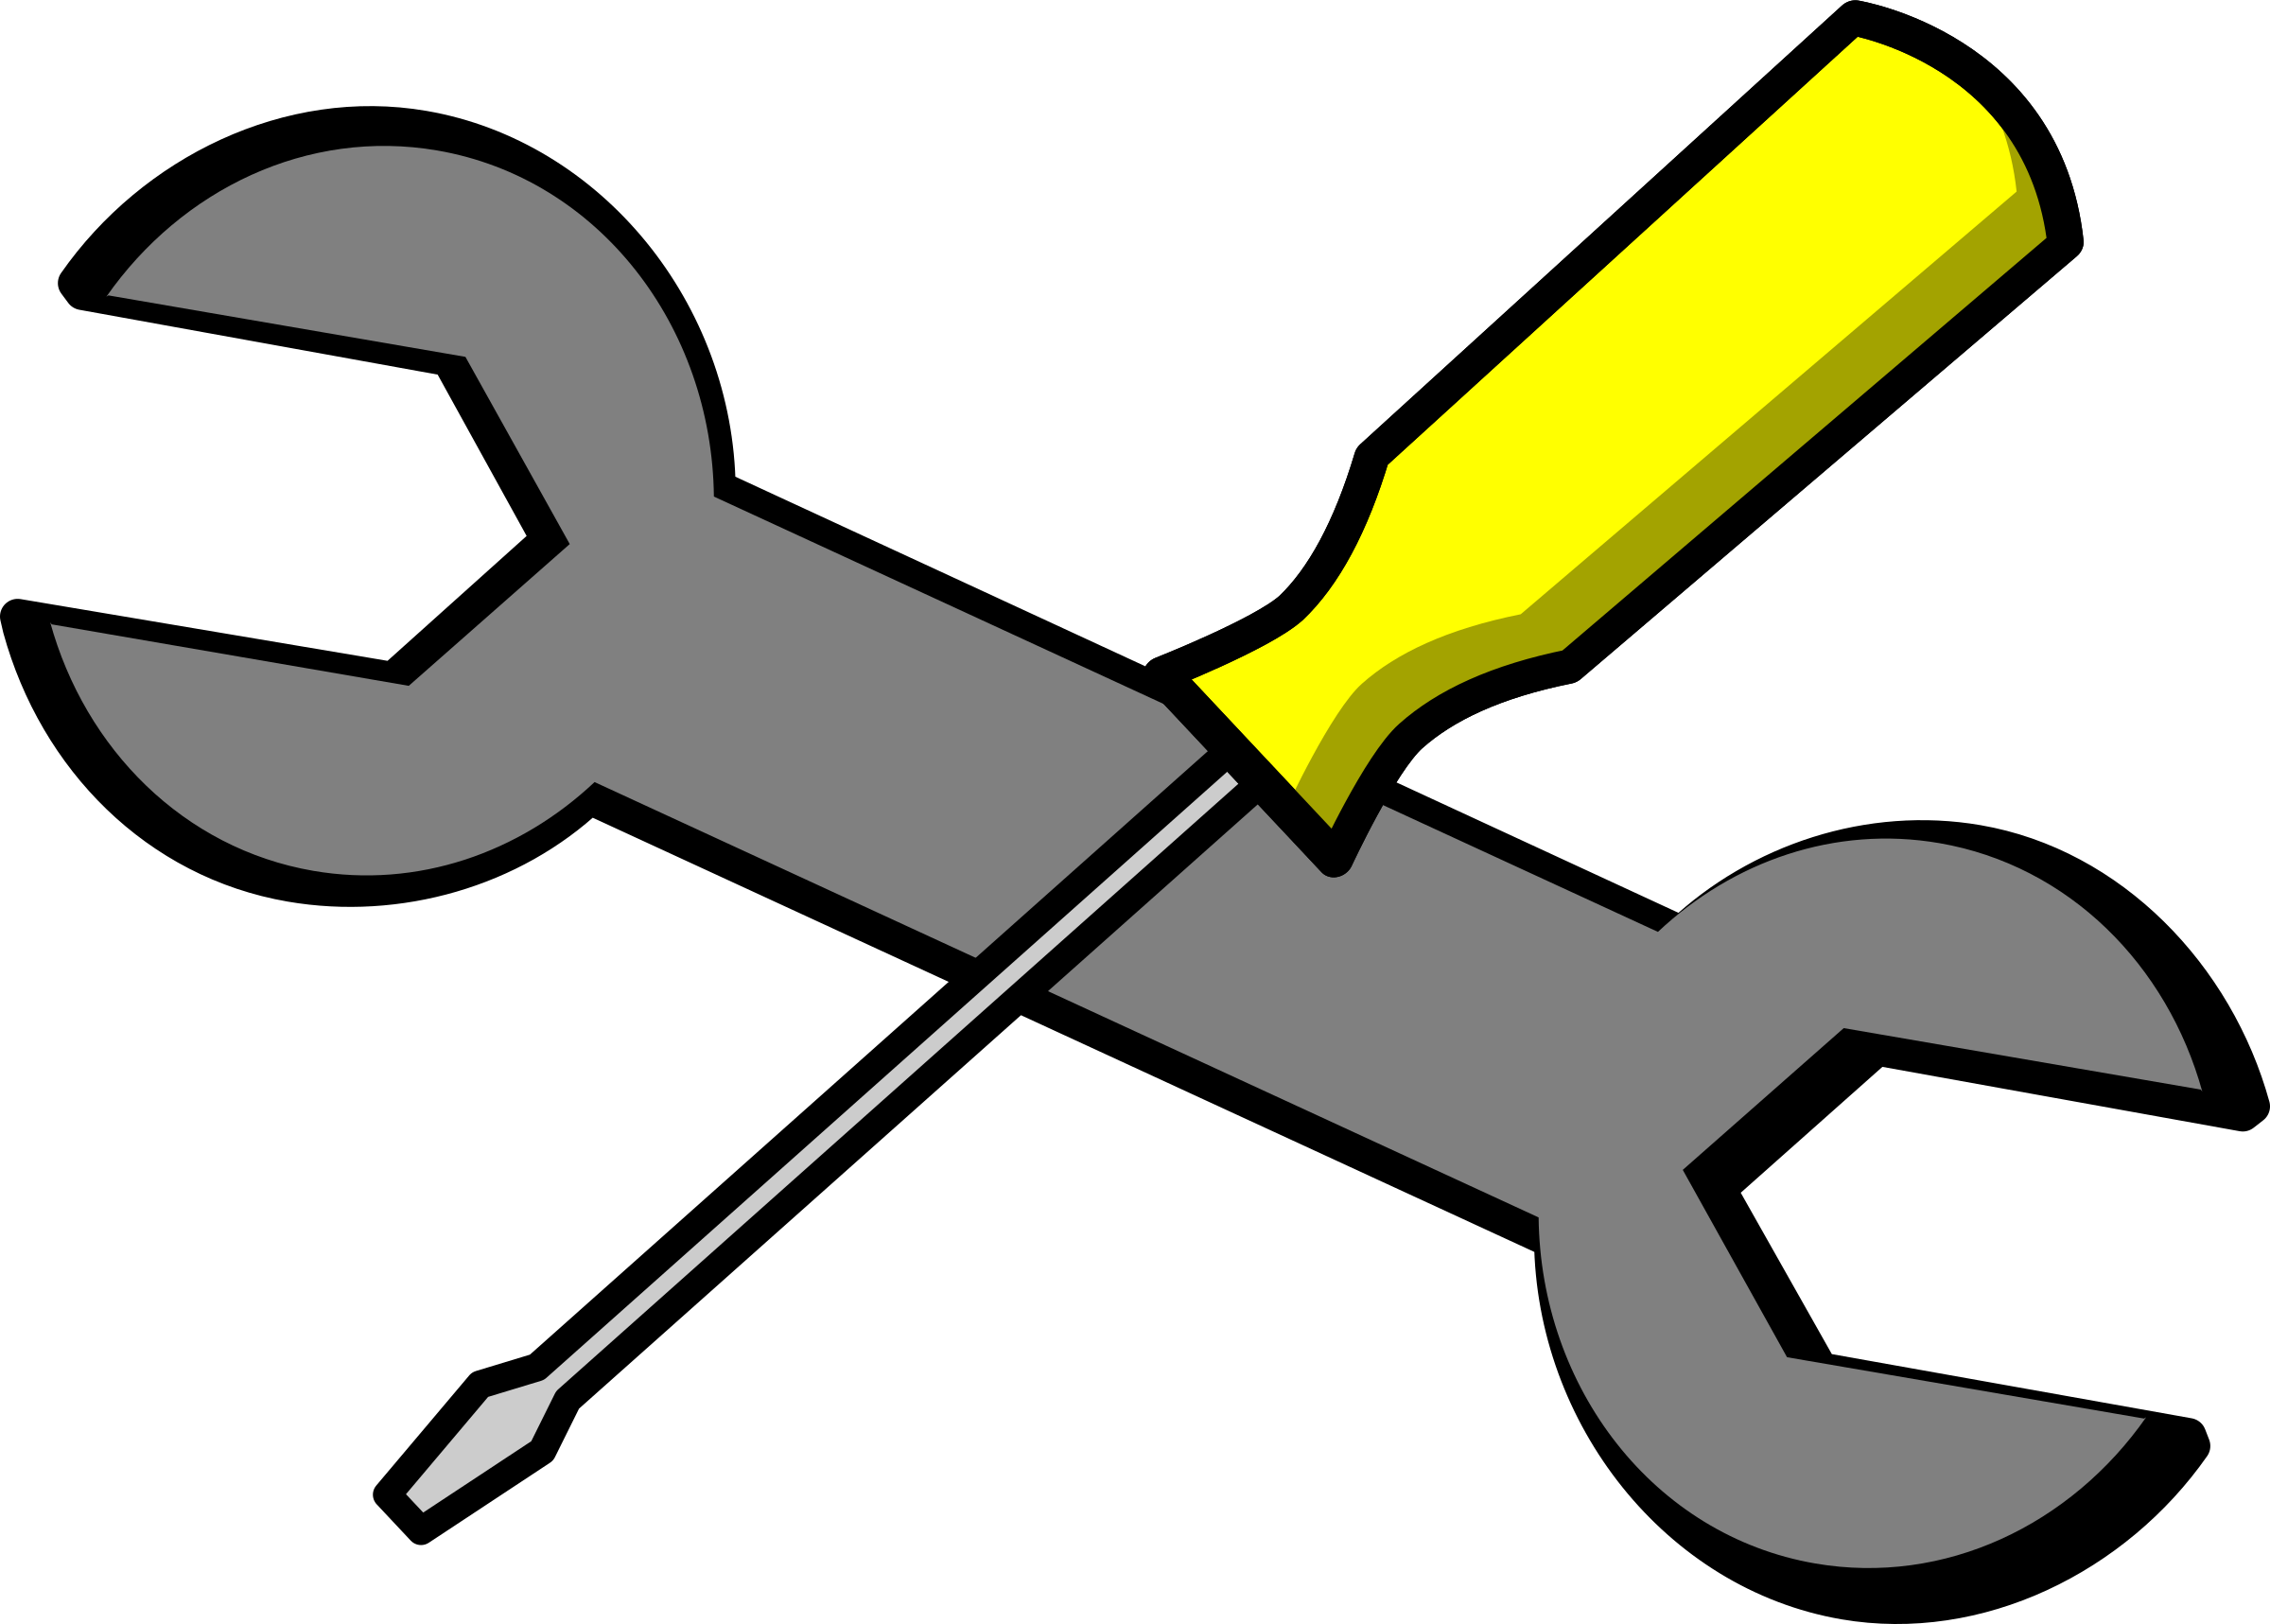 And wrench icon big. Screwdriver clipart